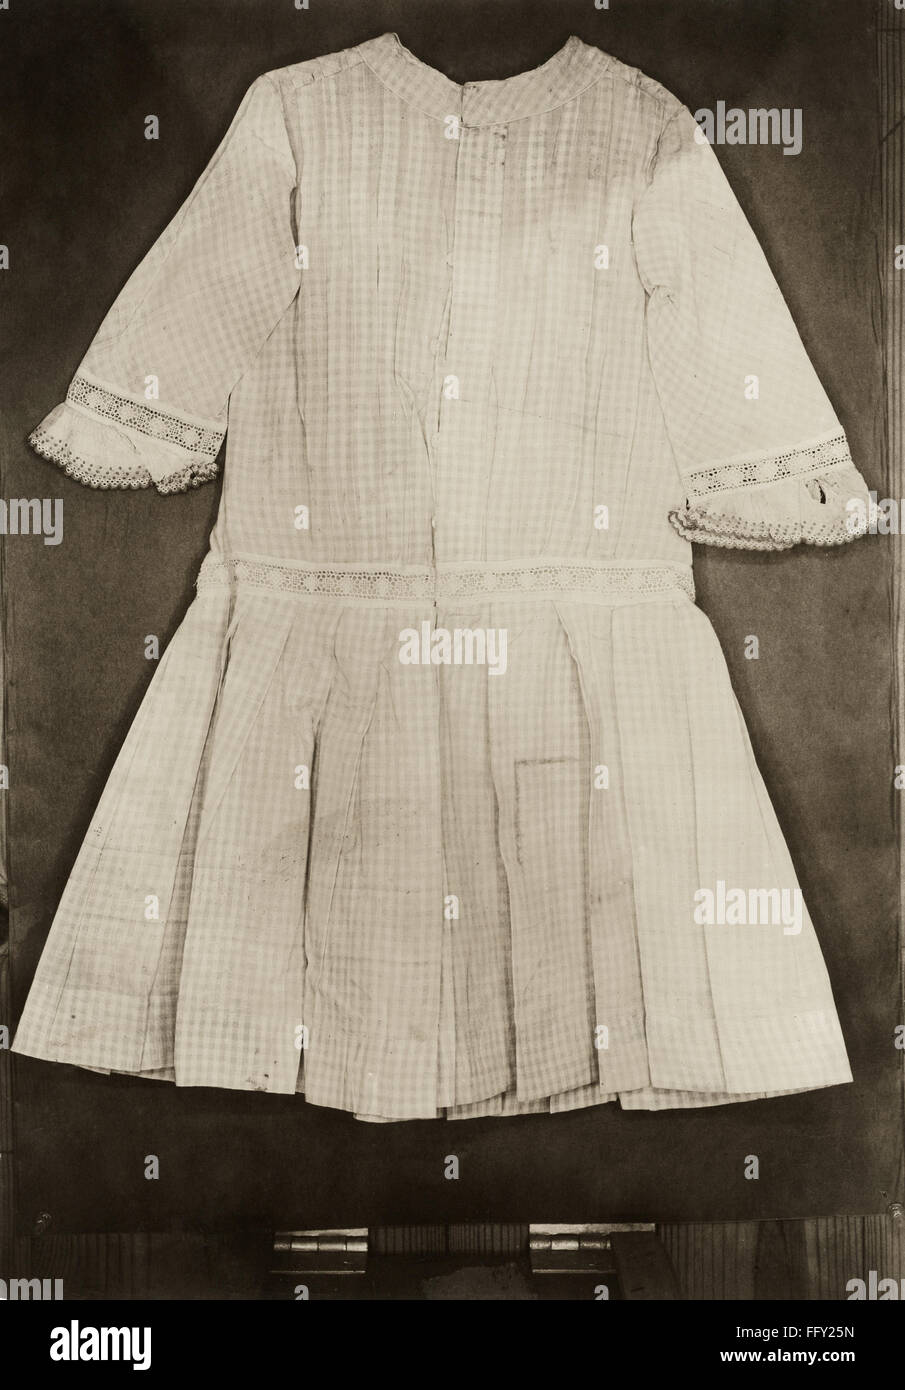 HINE: GARMENT, c1912. /nA finished dress from a factory in America. Photograph by Lewis Hine, c1912. Stock Photo